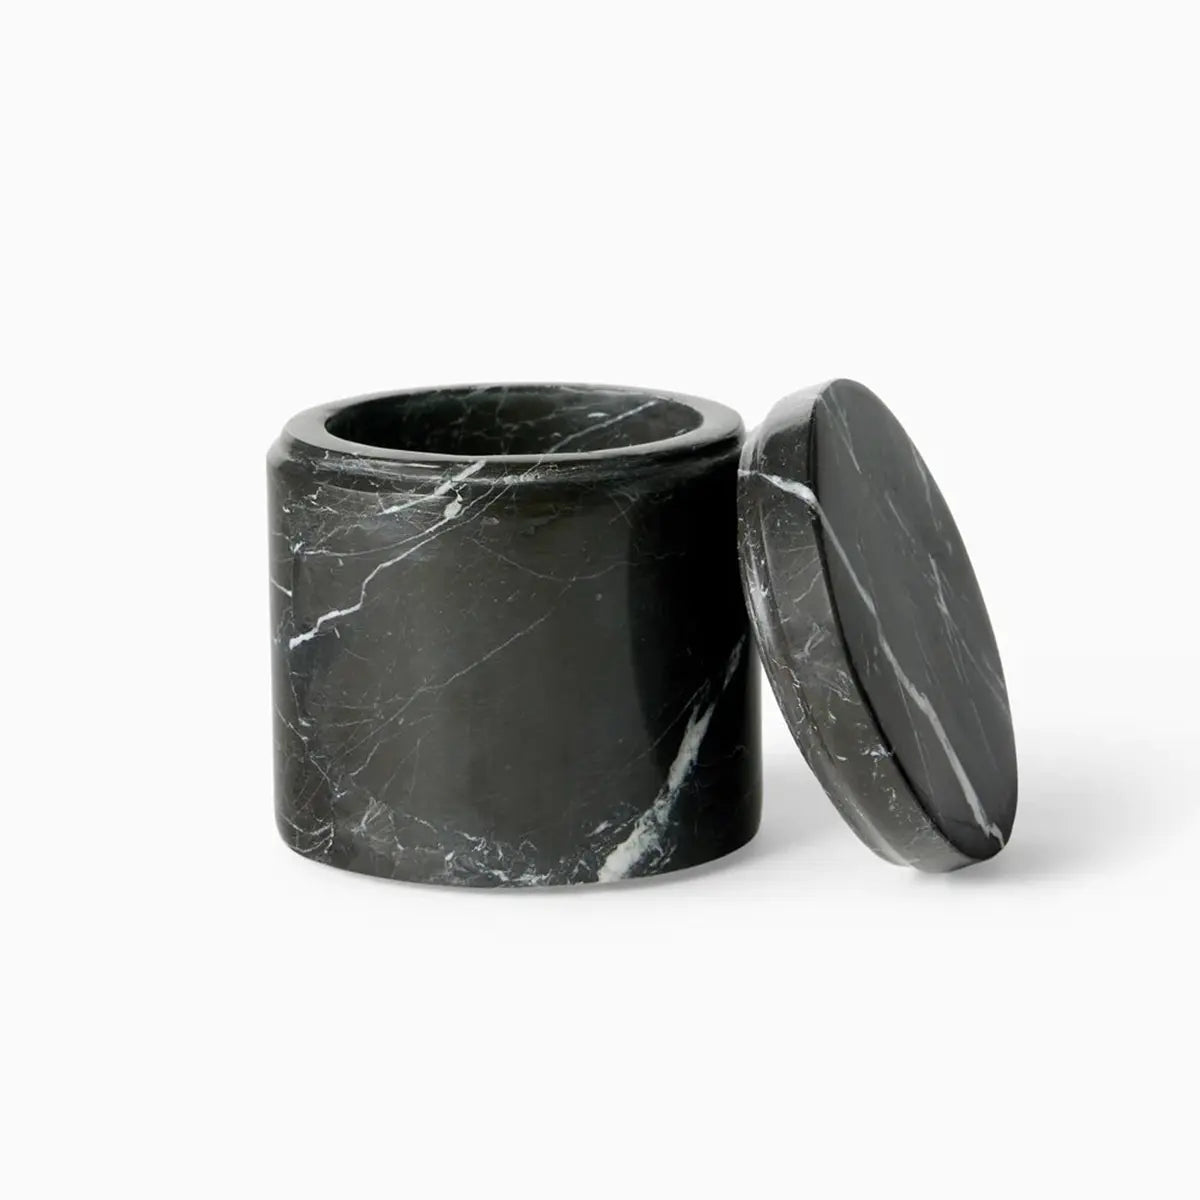 Sferra Marquina Storage Jar in Black Marble with lid open